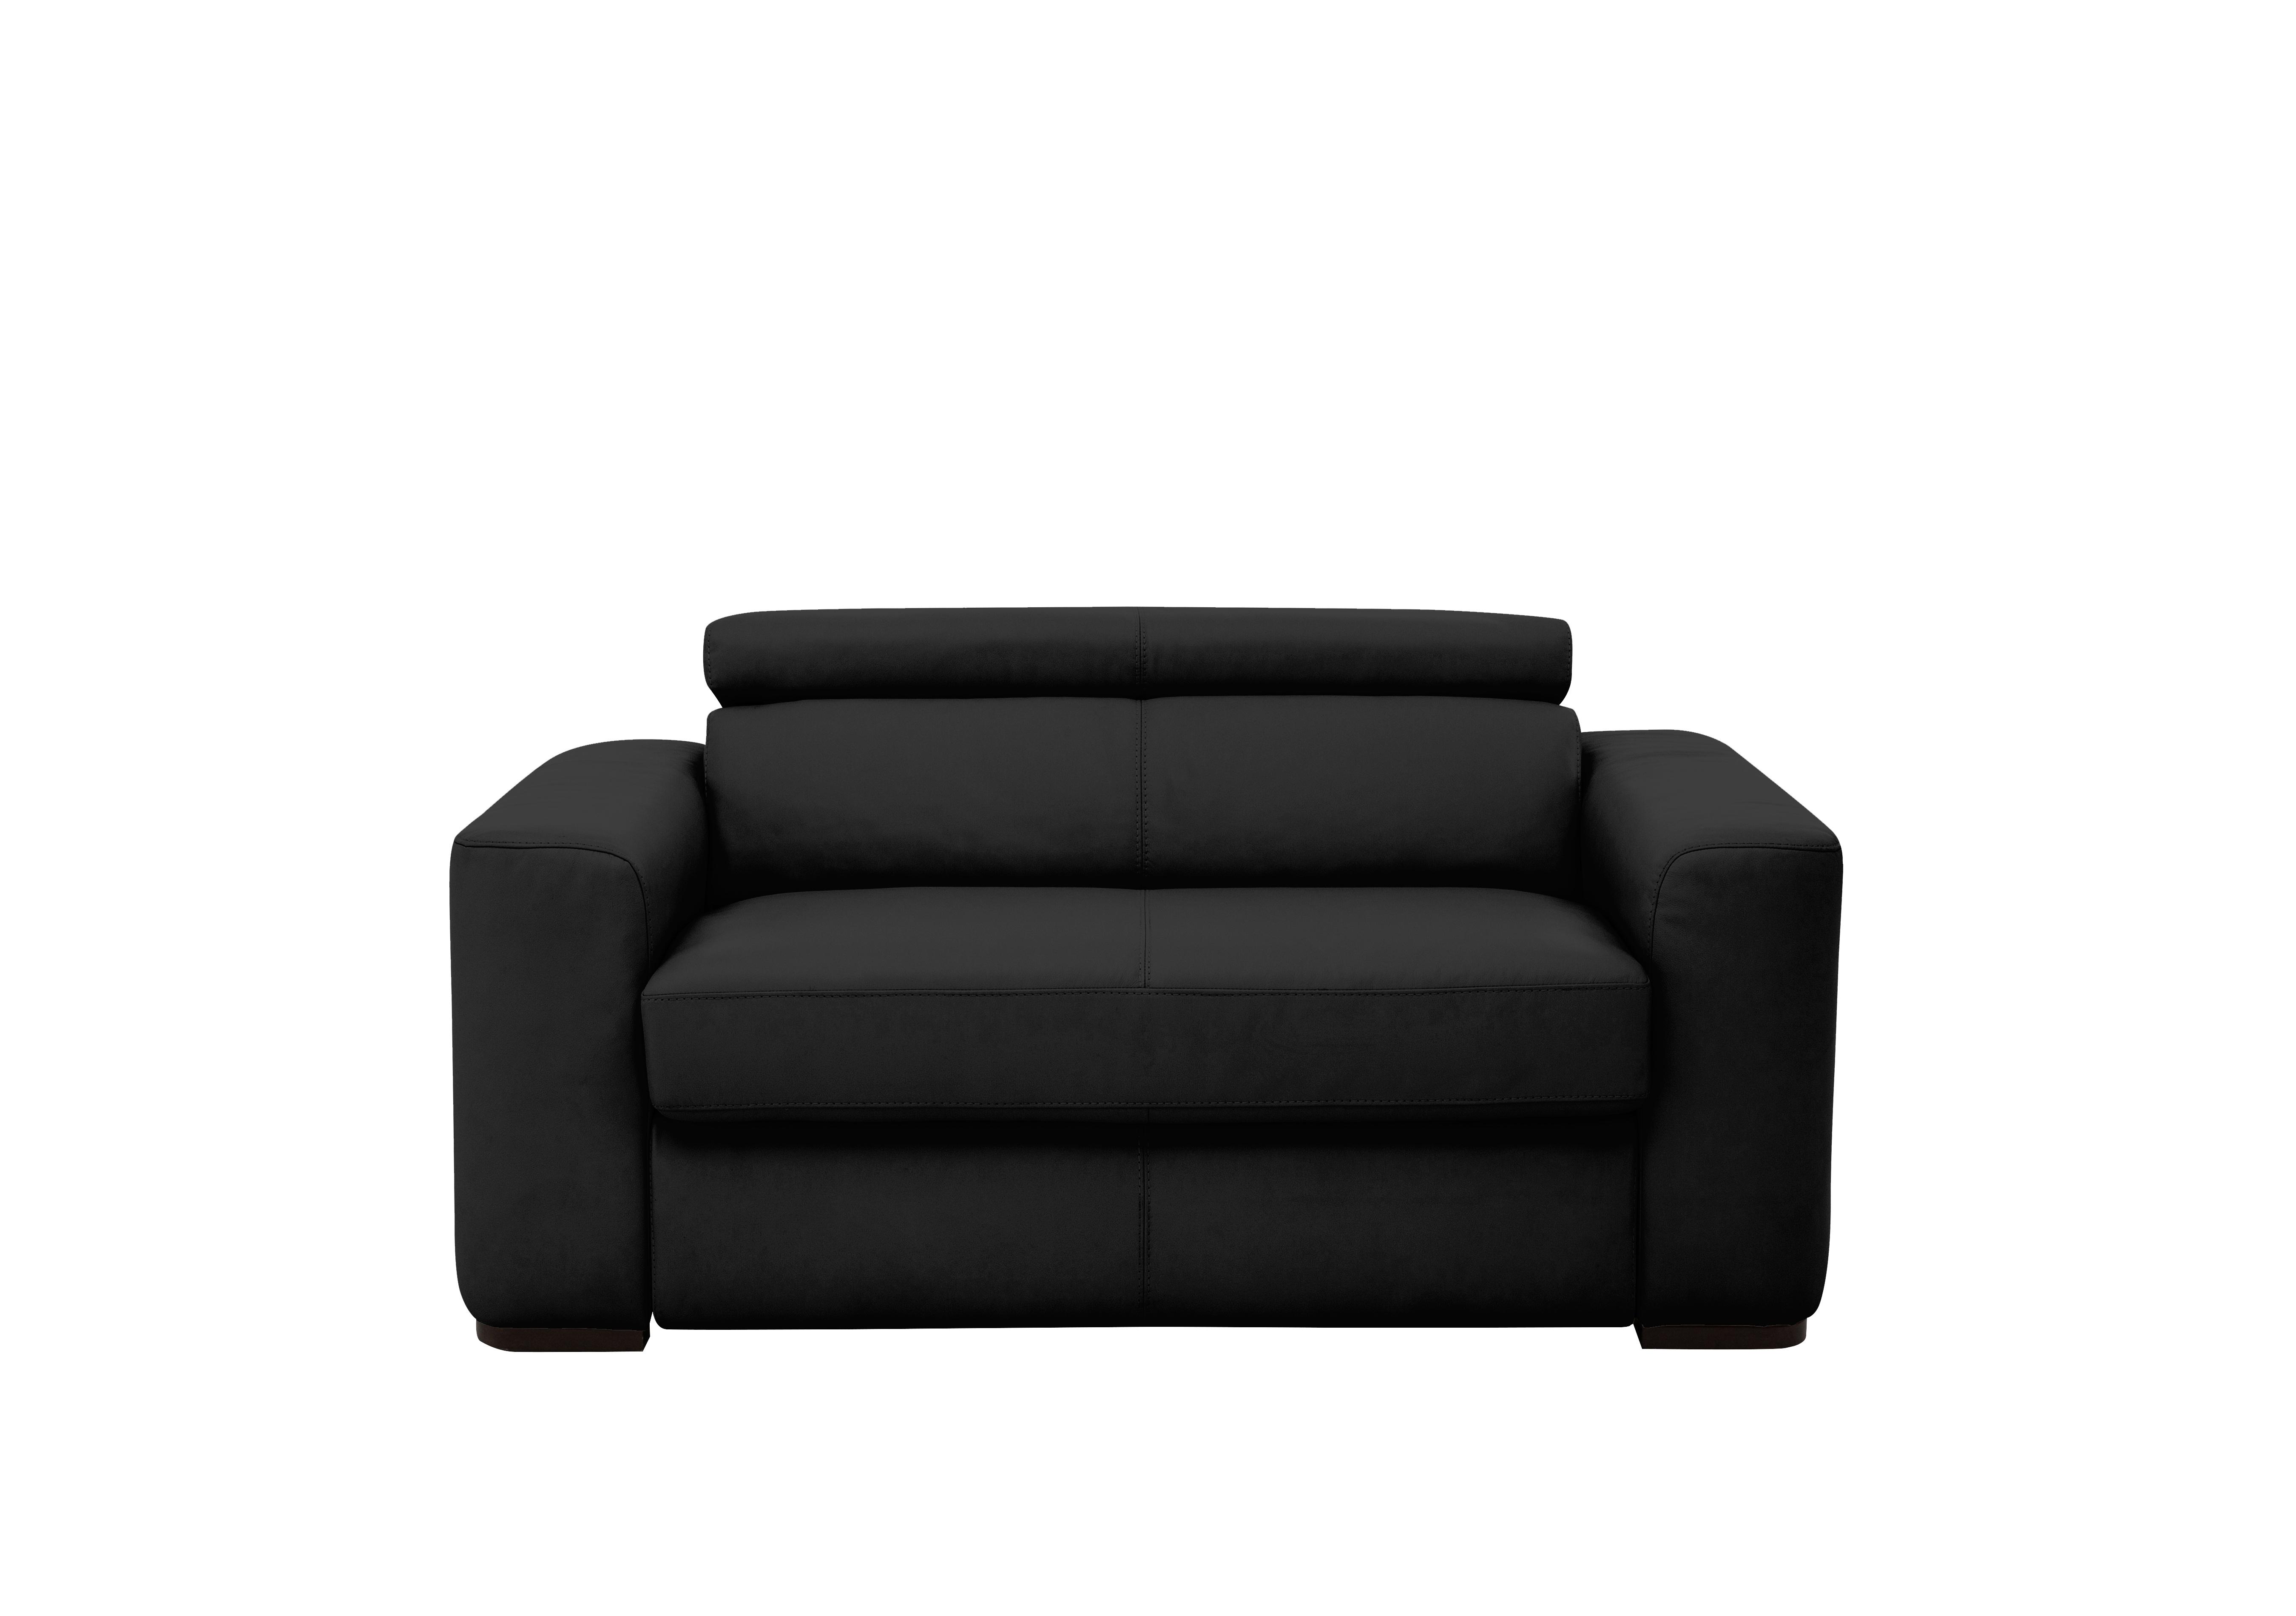 Infinity Large Leather Armchair in Bv-3500 Classic Black on Furniture Village